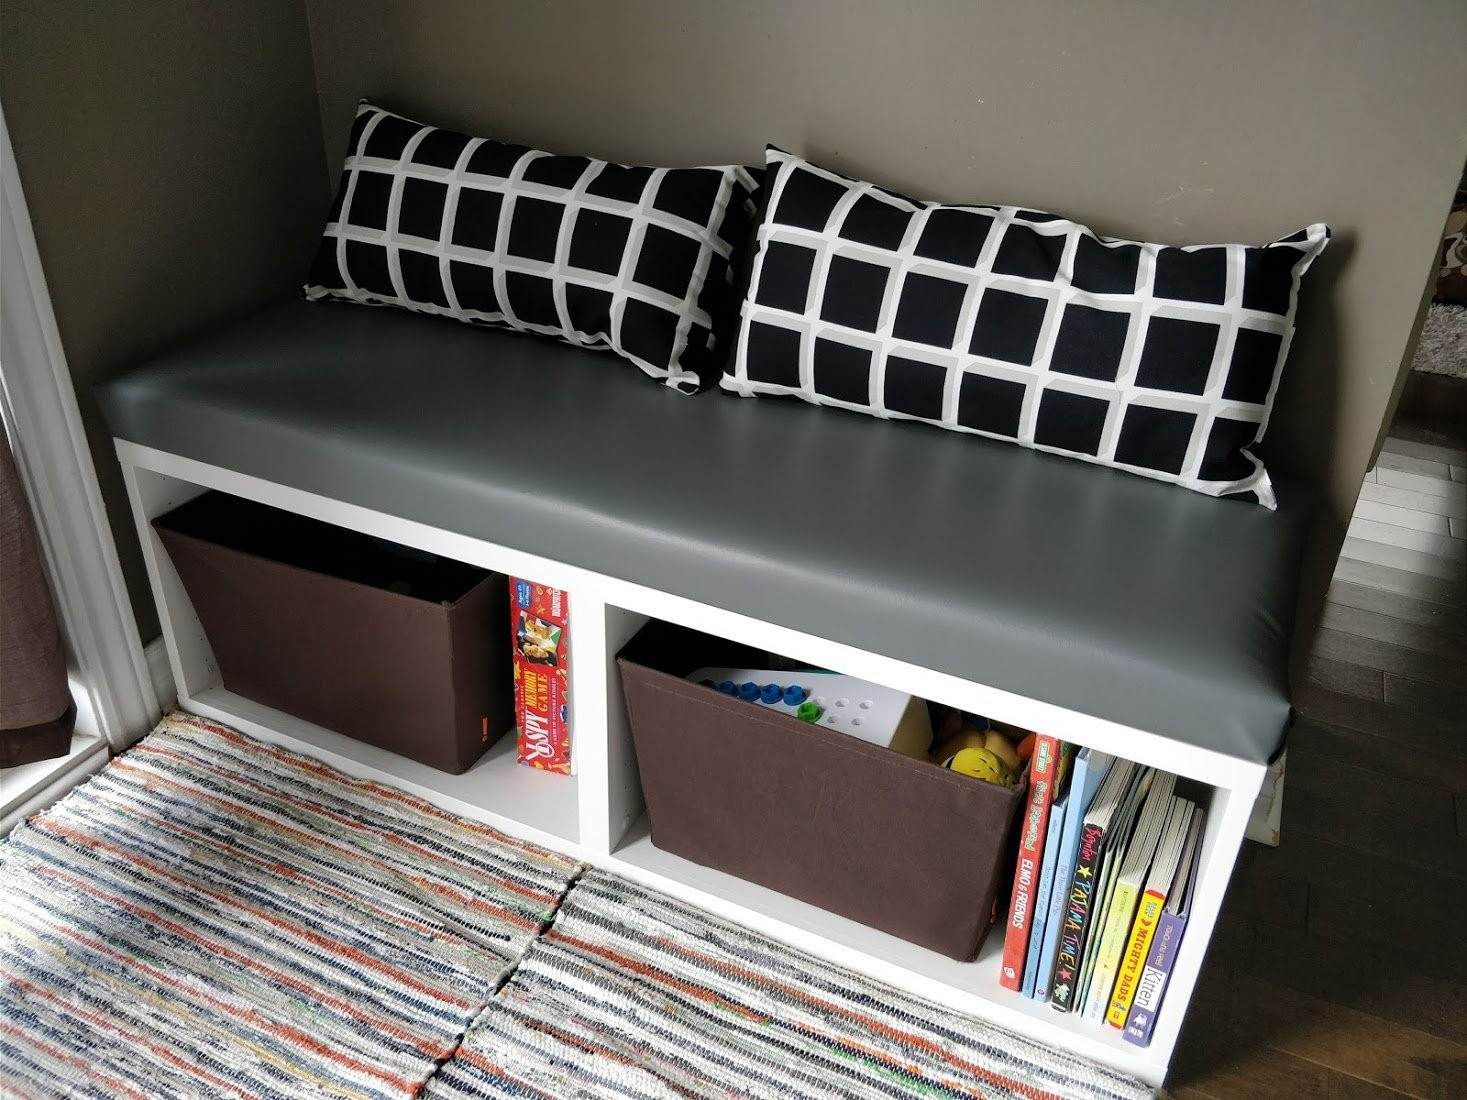 Ikea Bench Seat With Storage
 IKEA Besta Hack DIY seating bench perfect for small